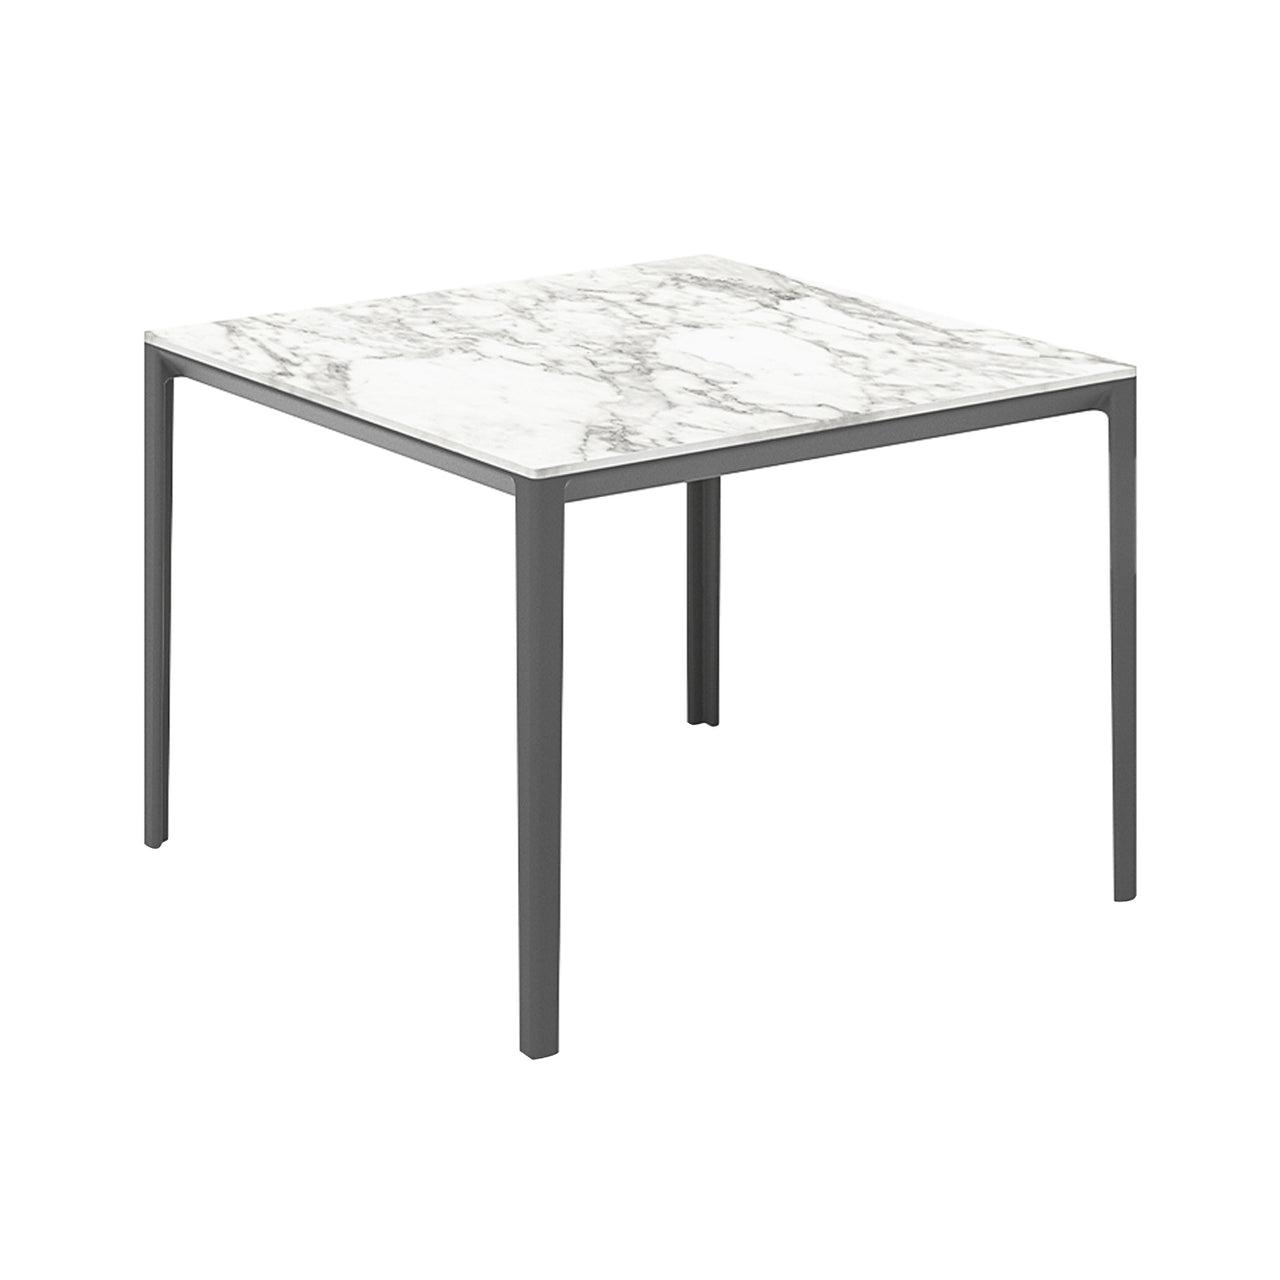 Able Dining Table: Square + Carrara Marble